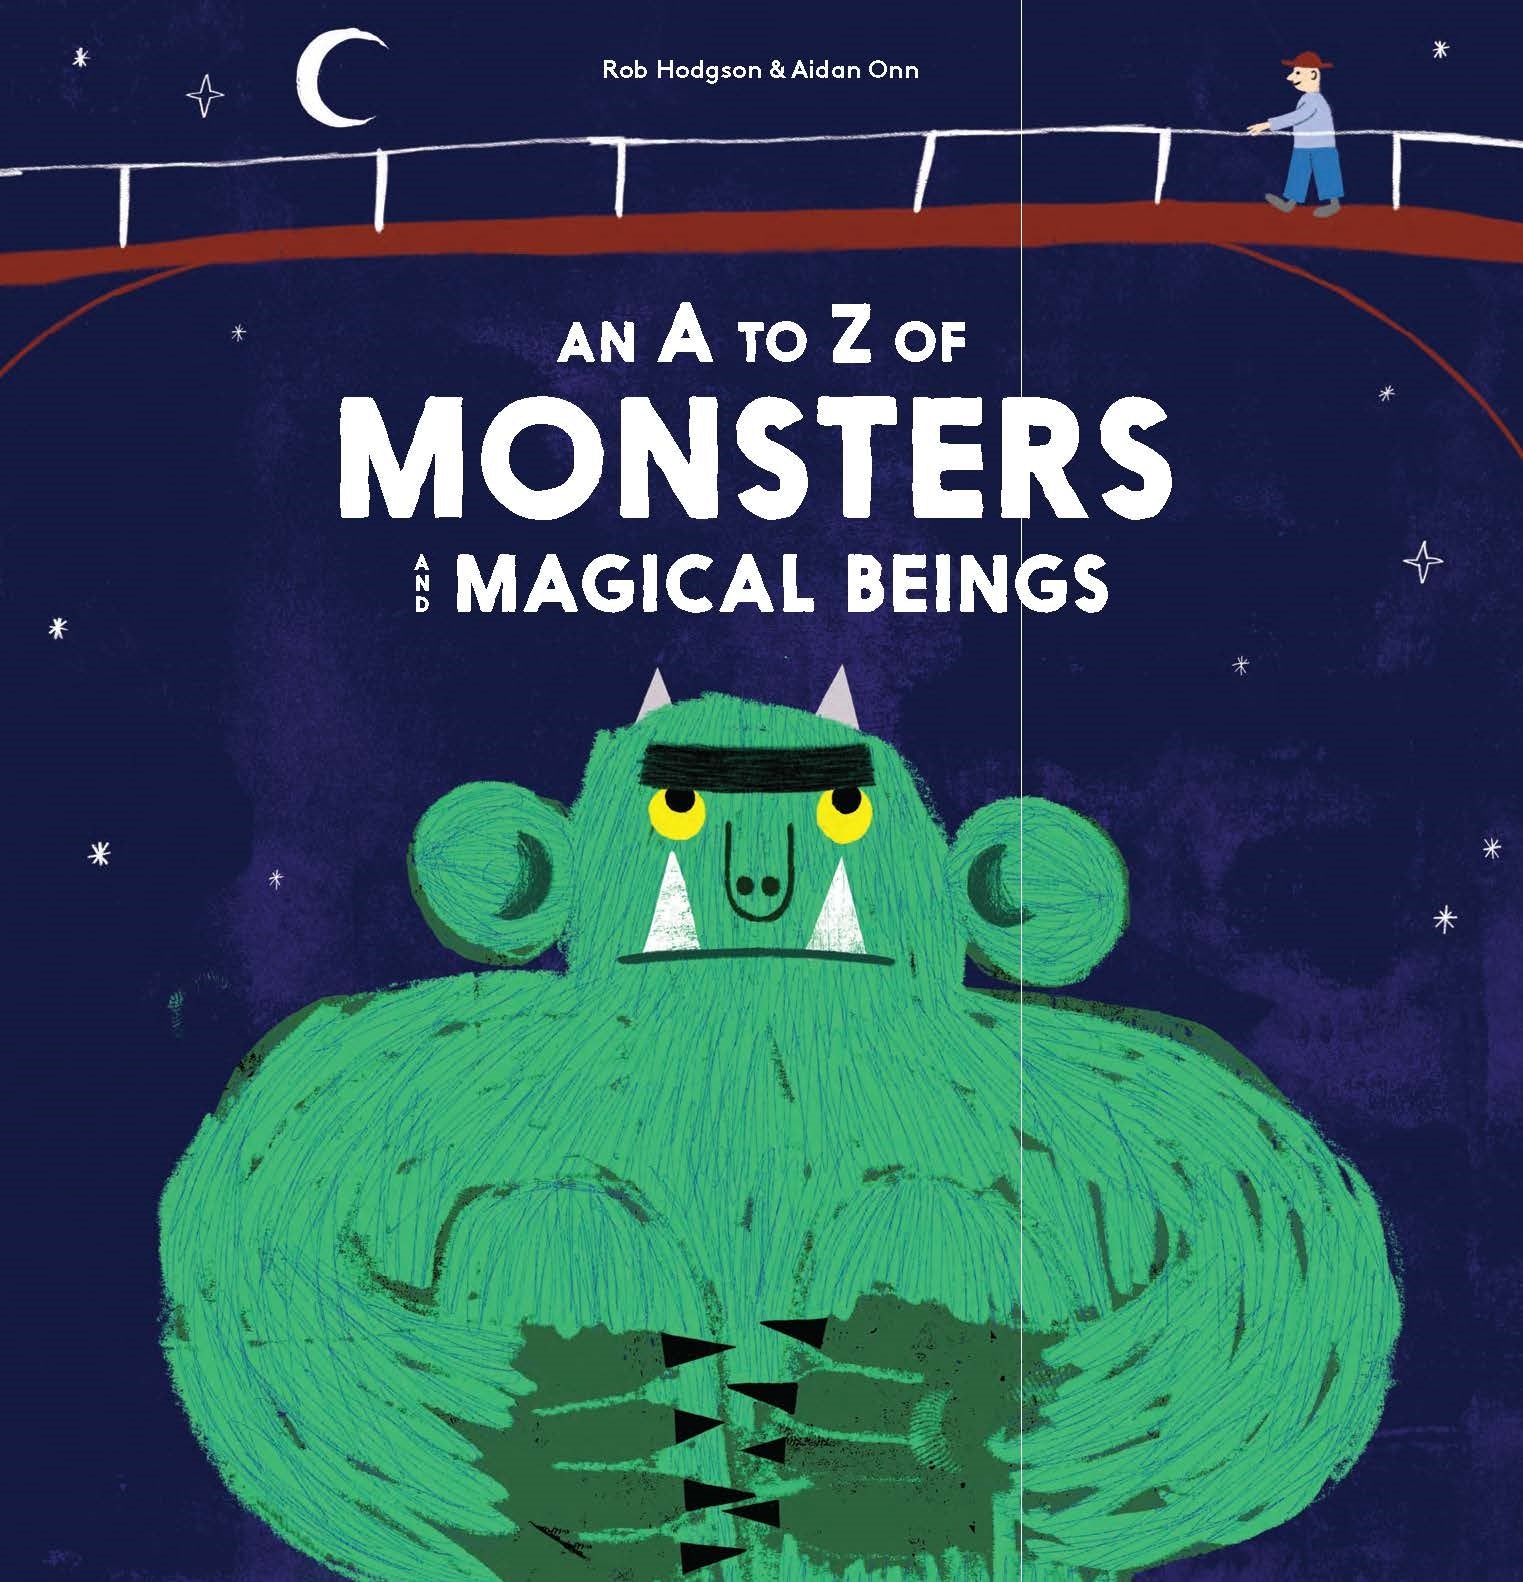 An A to Z of Monsters and Magical Beings by Rob Hodgson, Aidan Onn